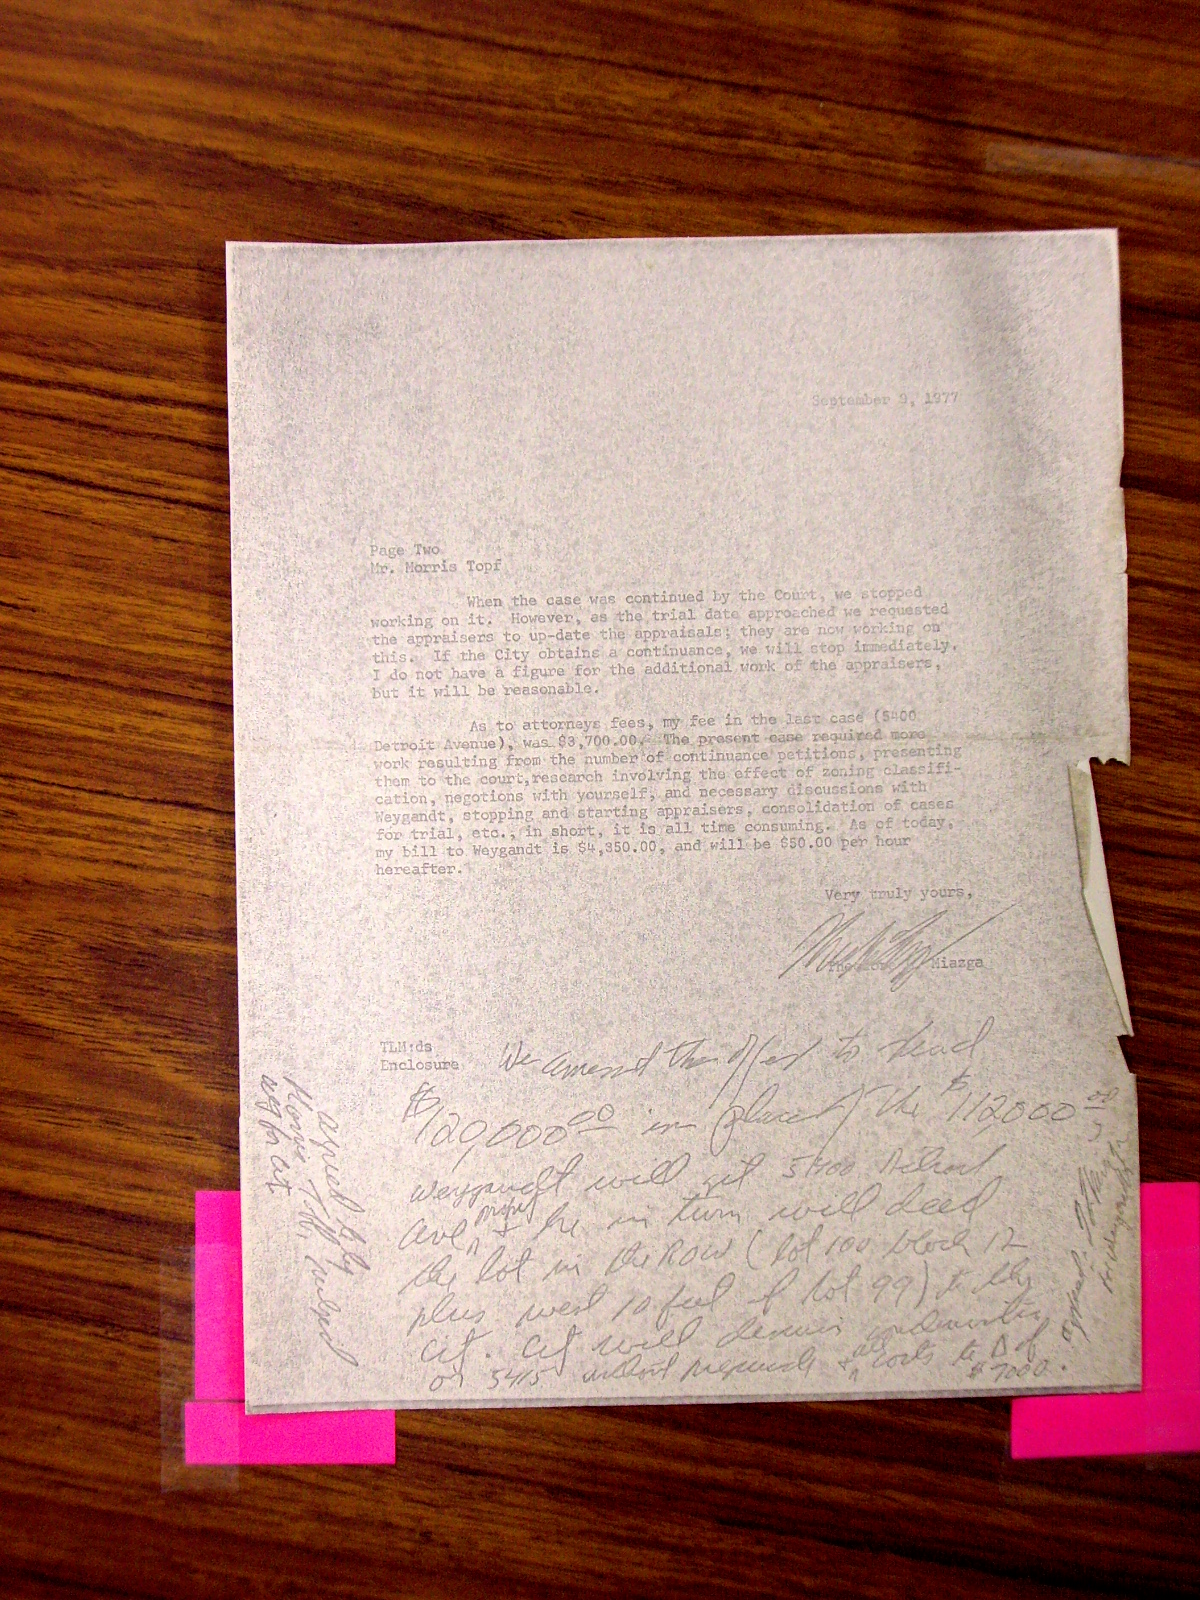 Page 2 of letter signed by Theodore Miazga, attorney  